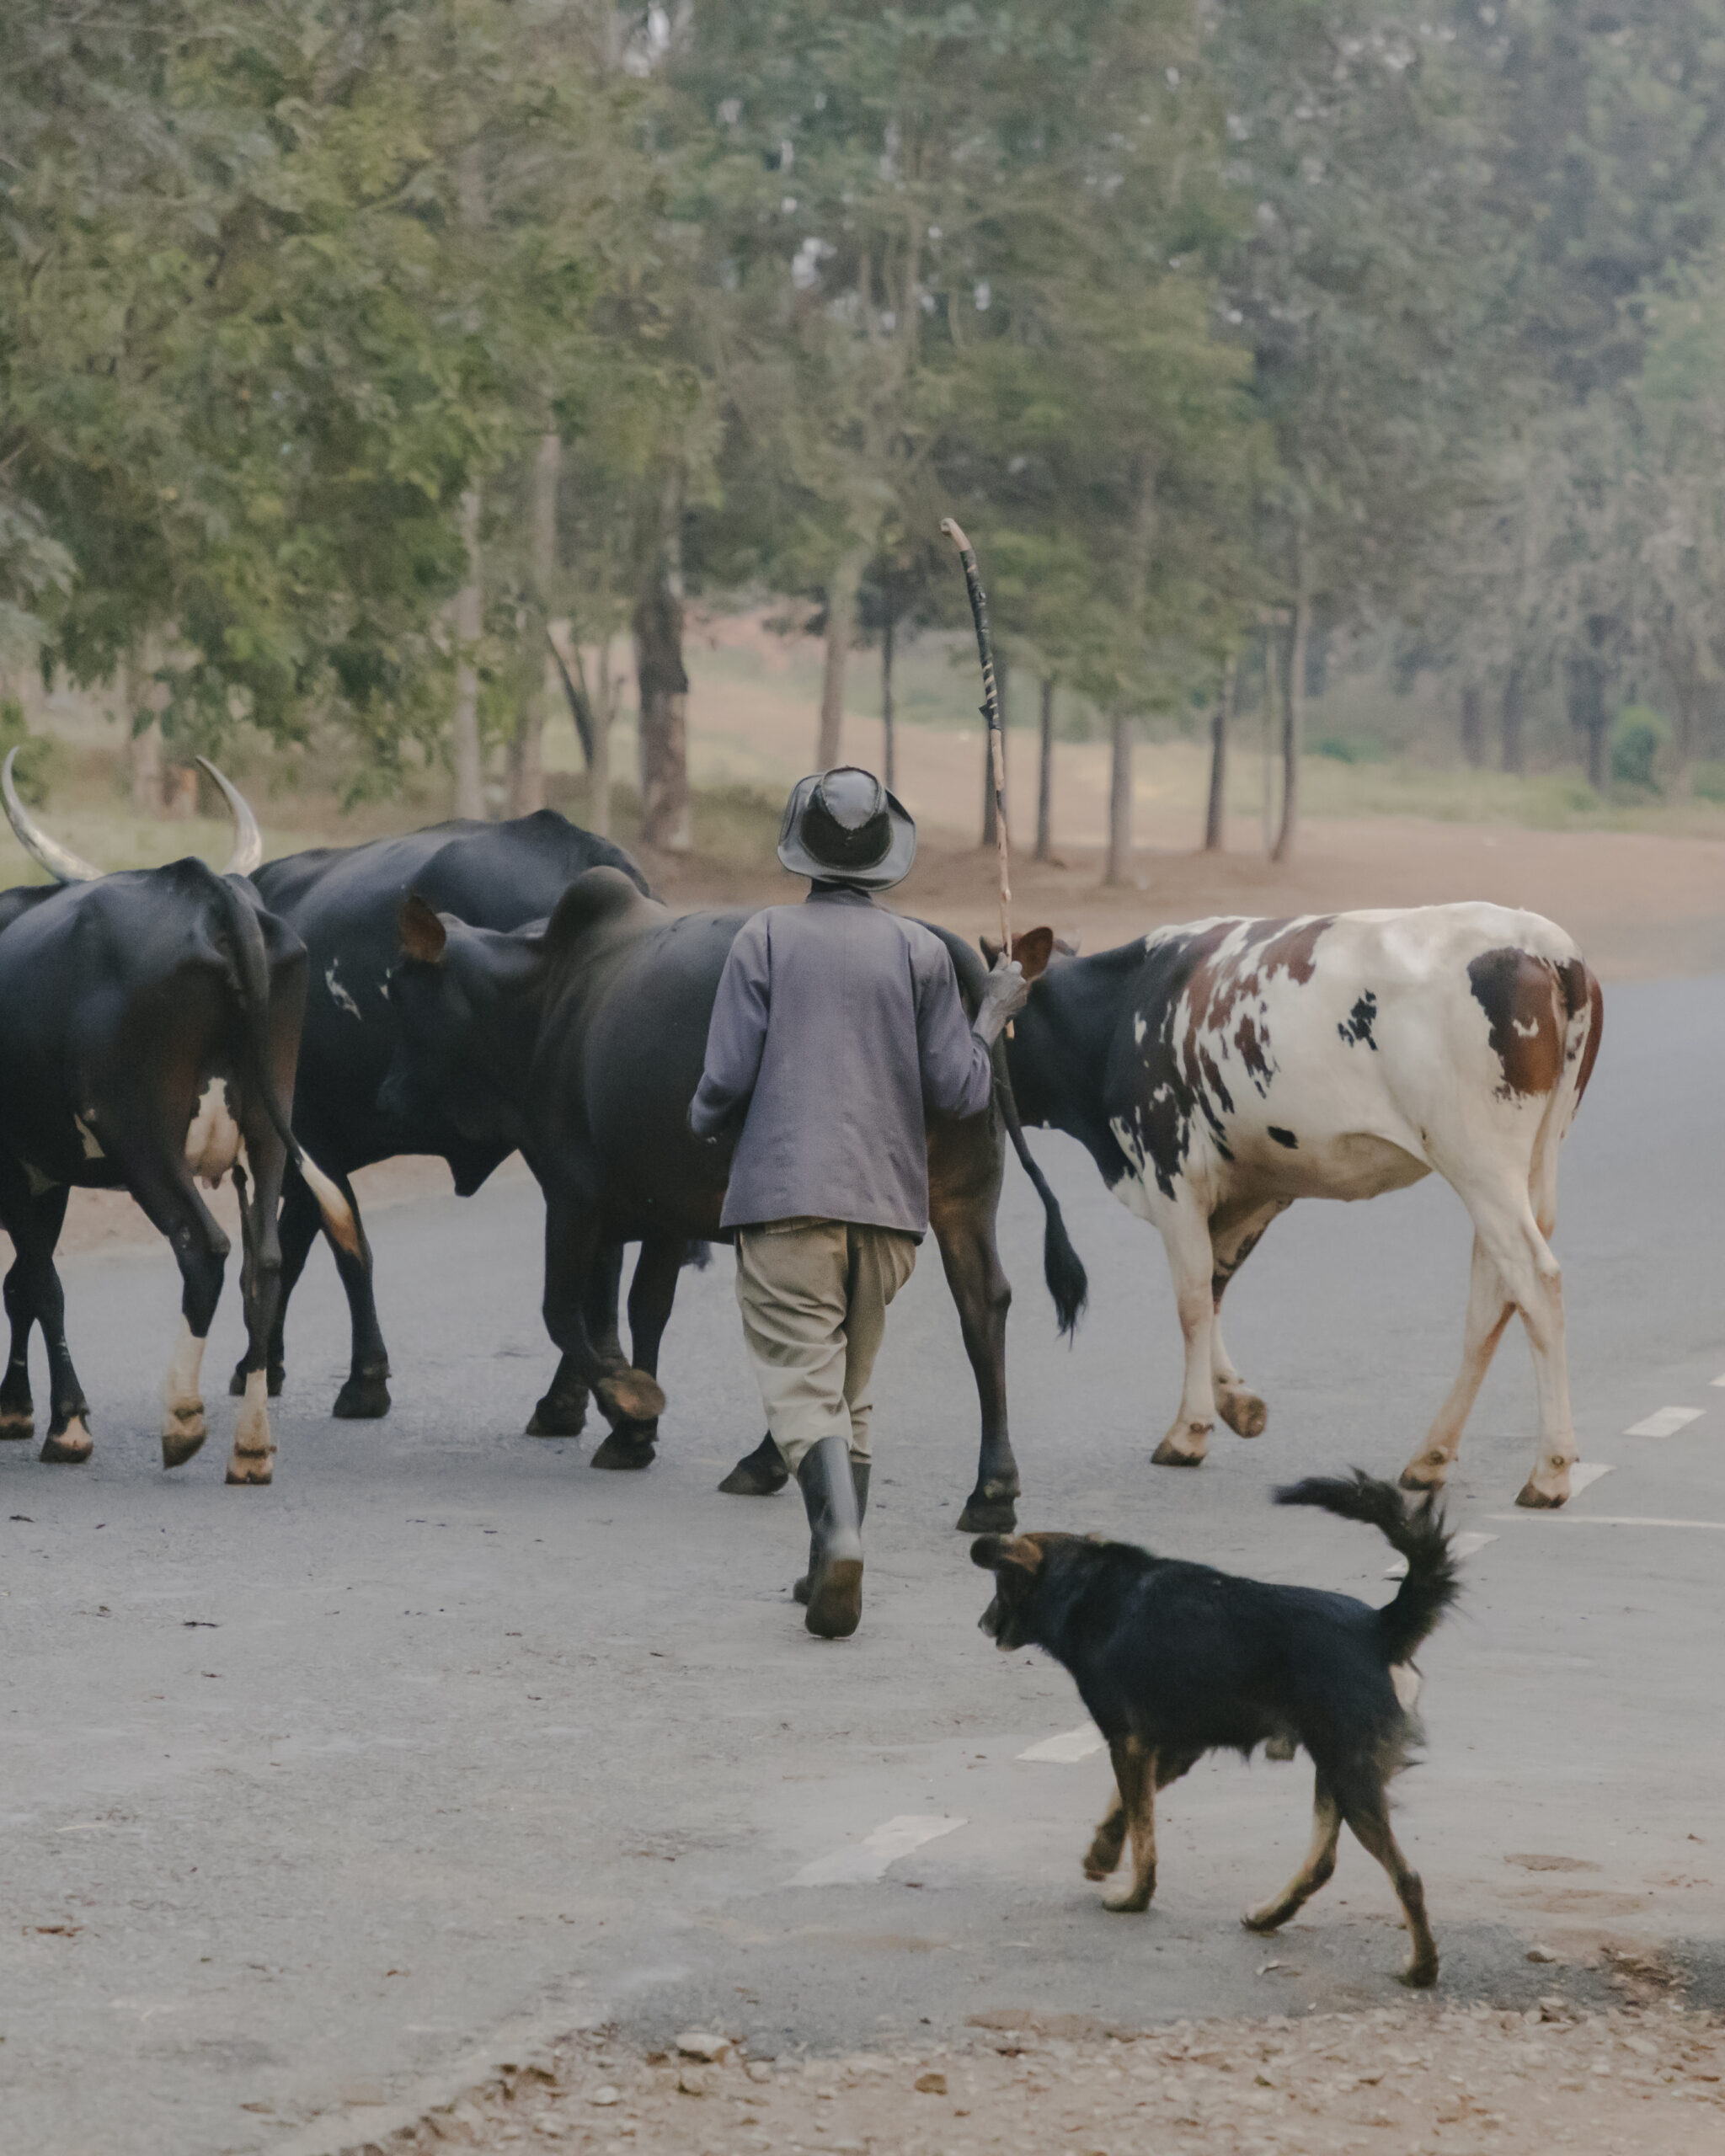 A person with a dog moves a small herd of cows across a street